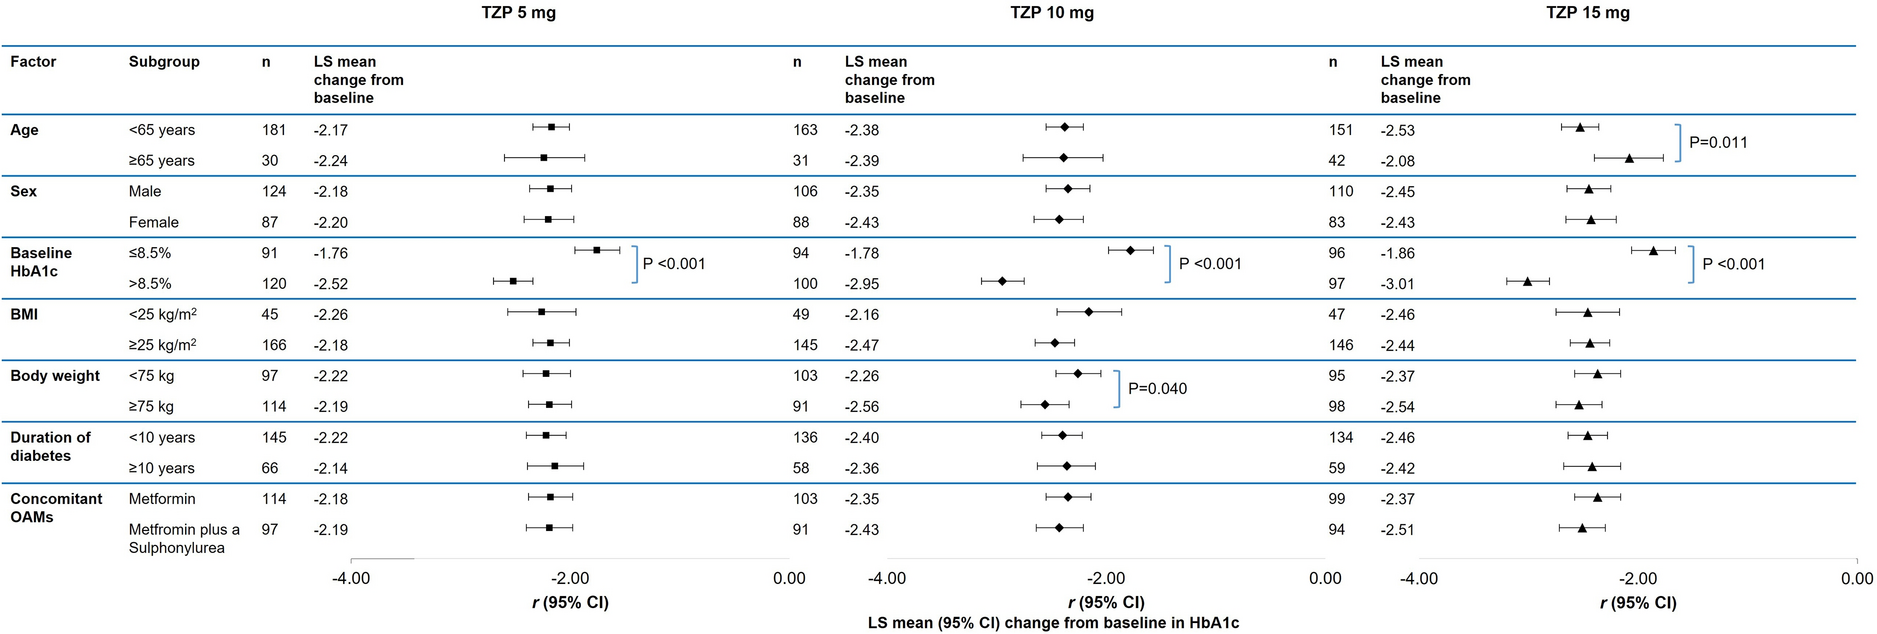 Efficacy and Safety of Tirzepatide in Patients with Type 2 Diabetes: Analysis of SURPASS-AP-Combo by Different Subgroups